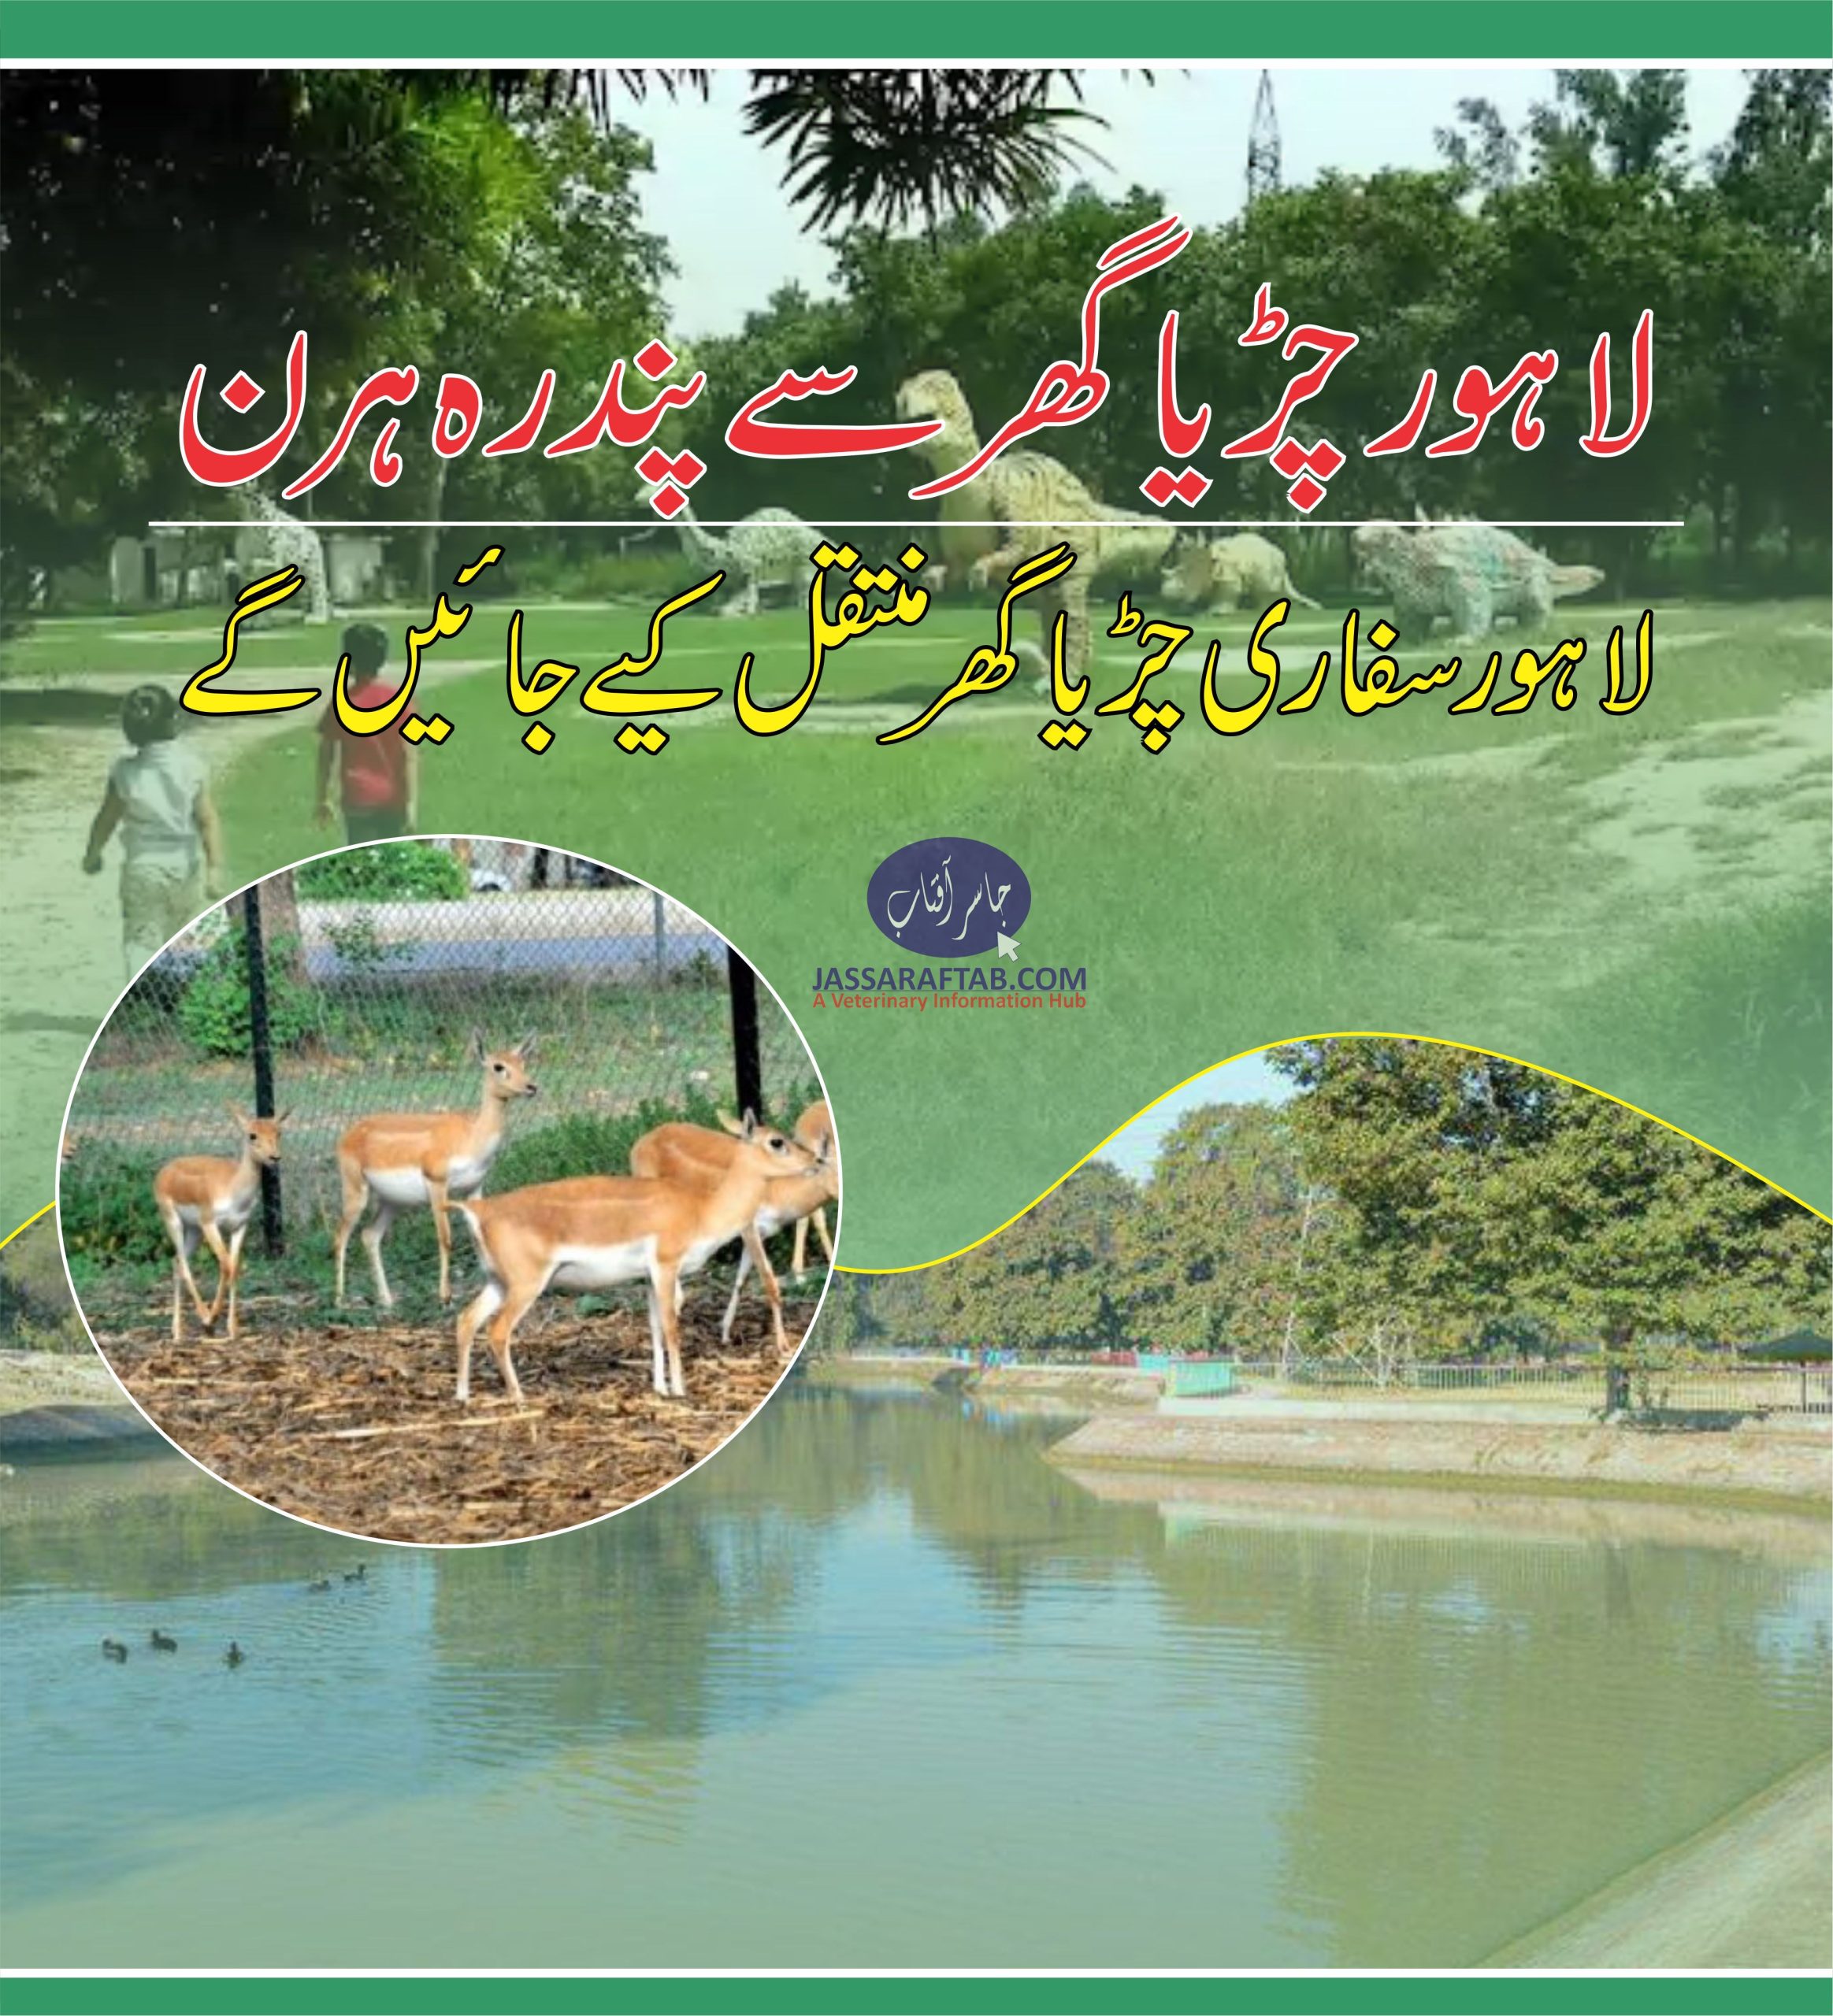 Deer to be shifted to Lahore safari Park